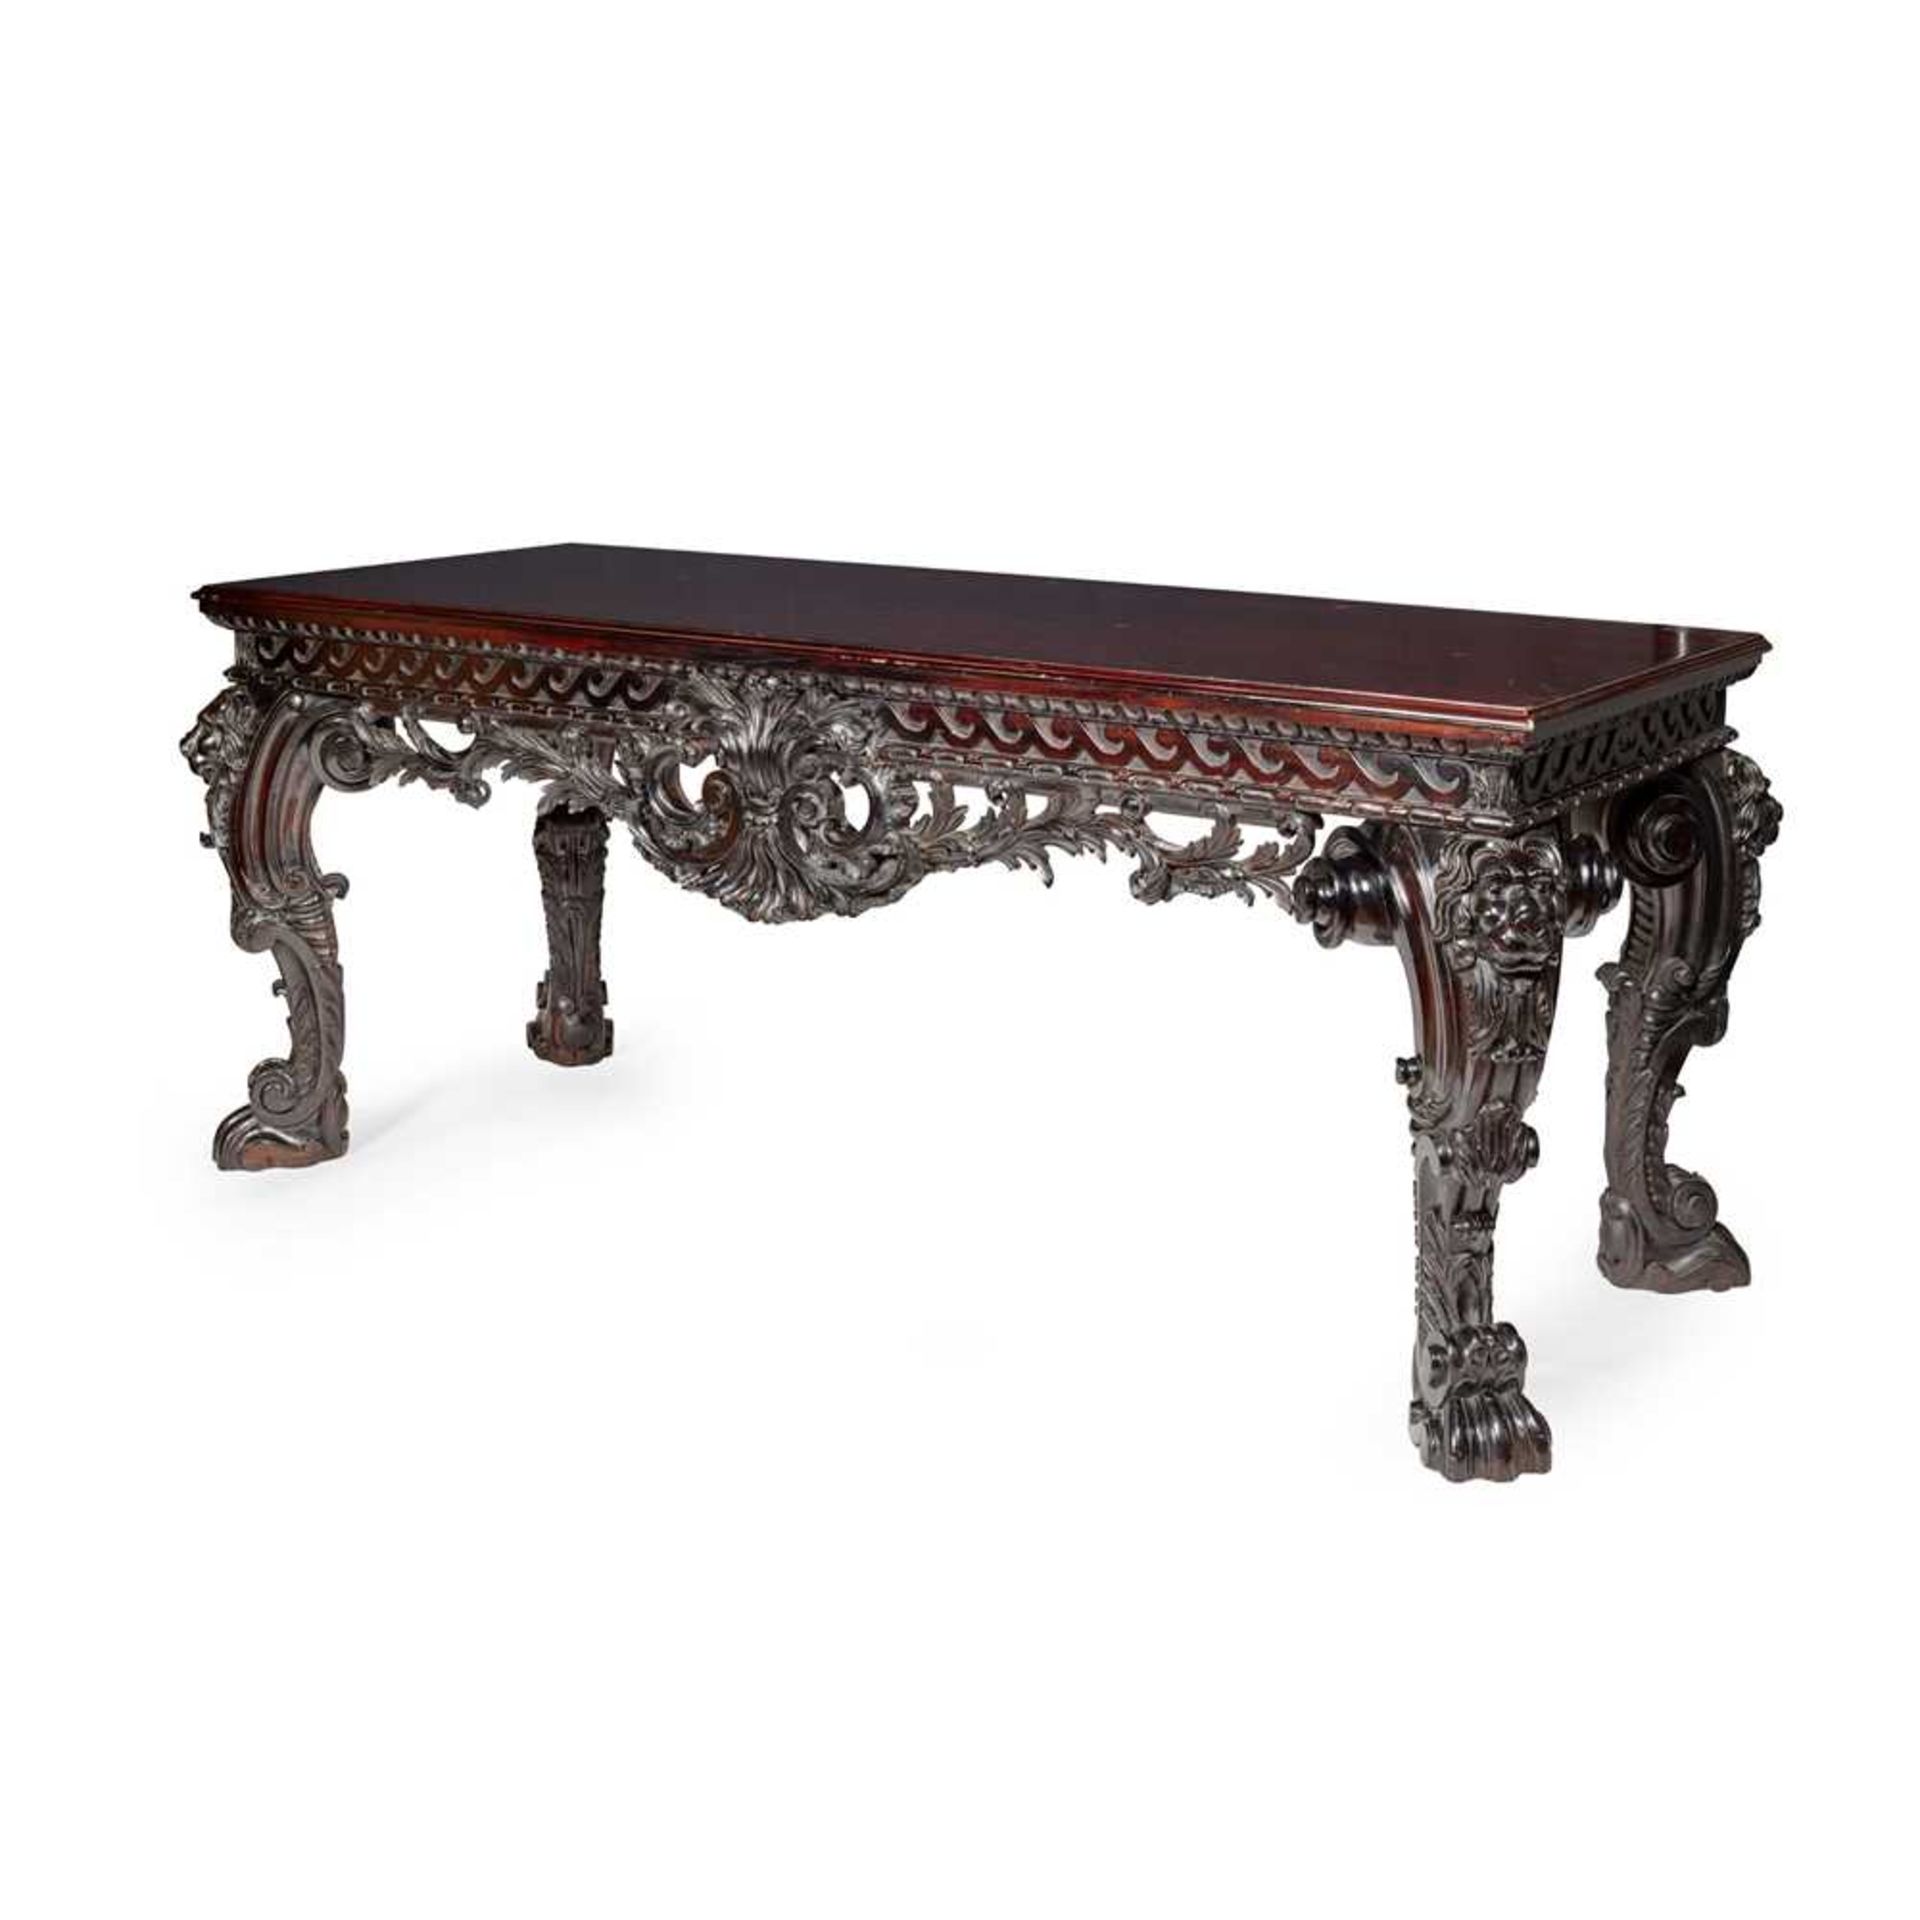 GEORGE II STYLE 'BRIGHTLING PARK' STAINED MAHOGANY HALL TABLE MODERN